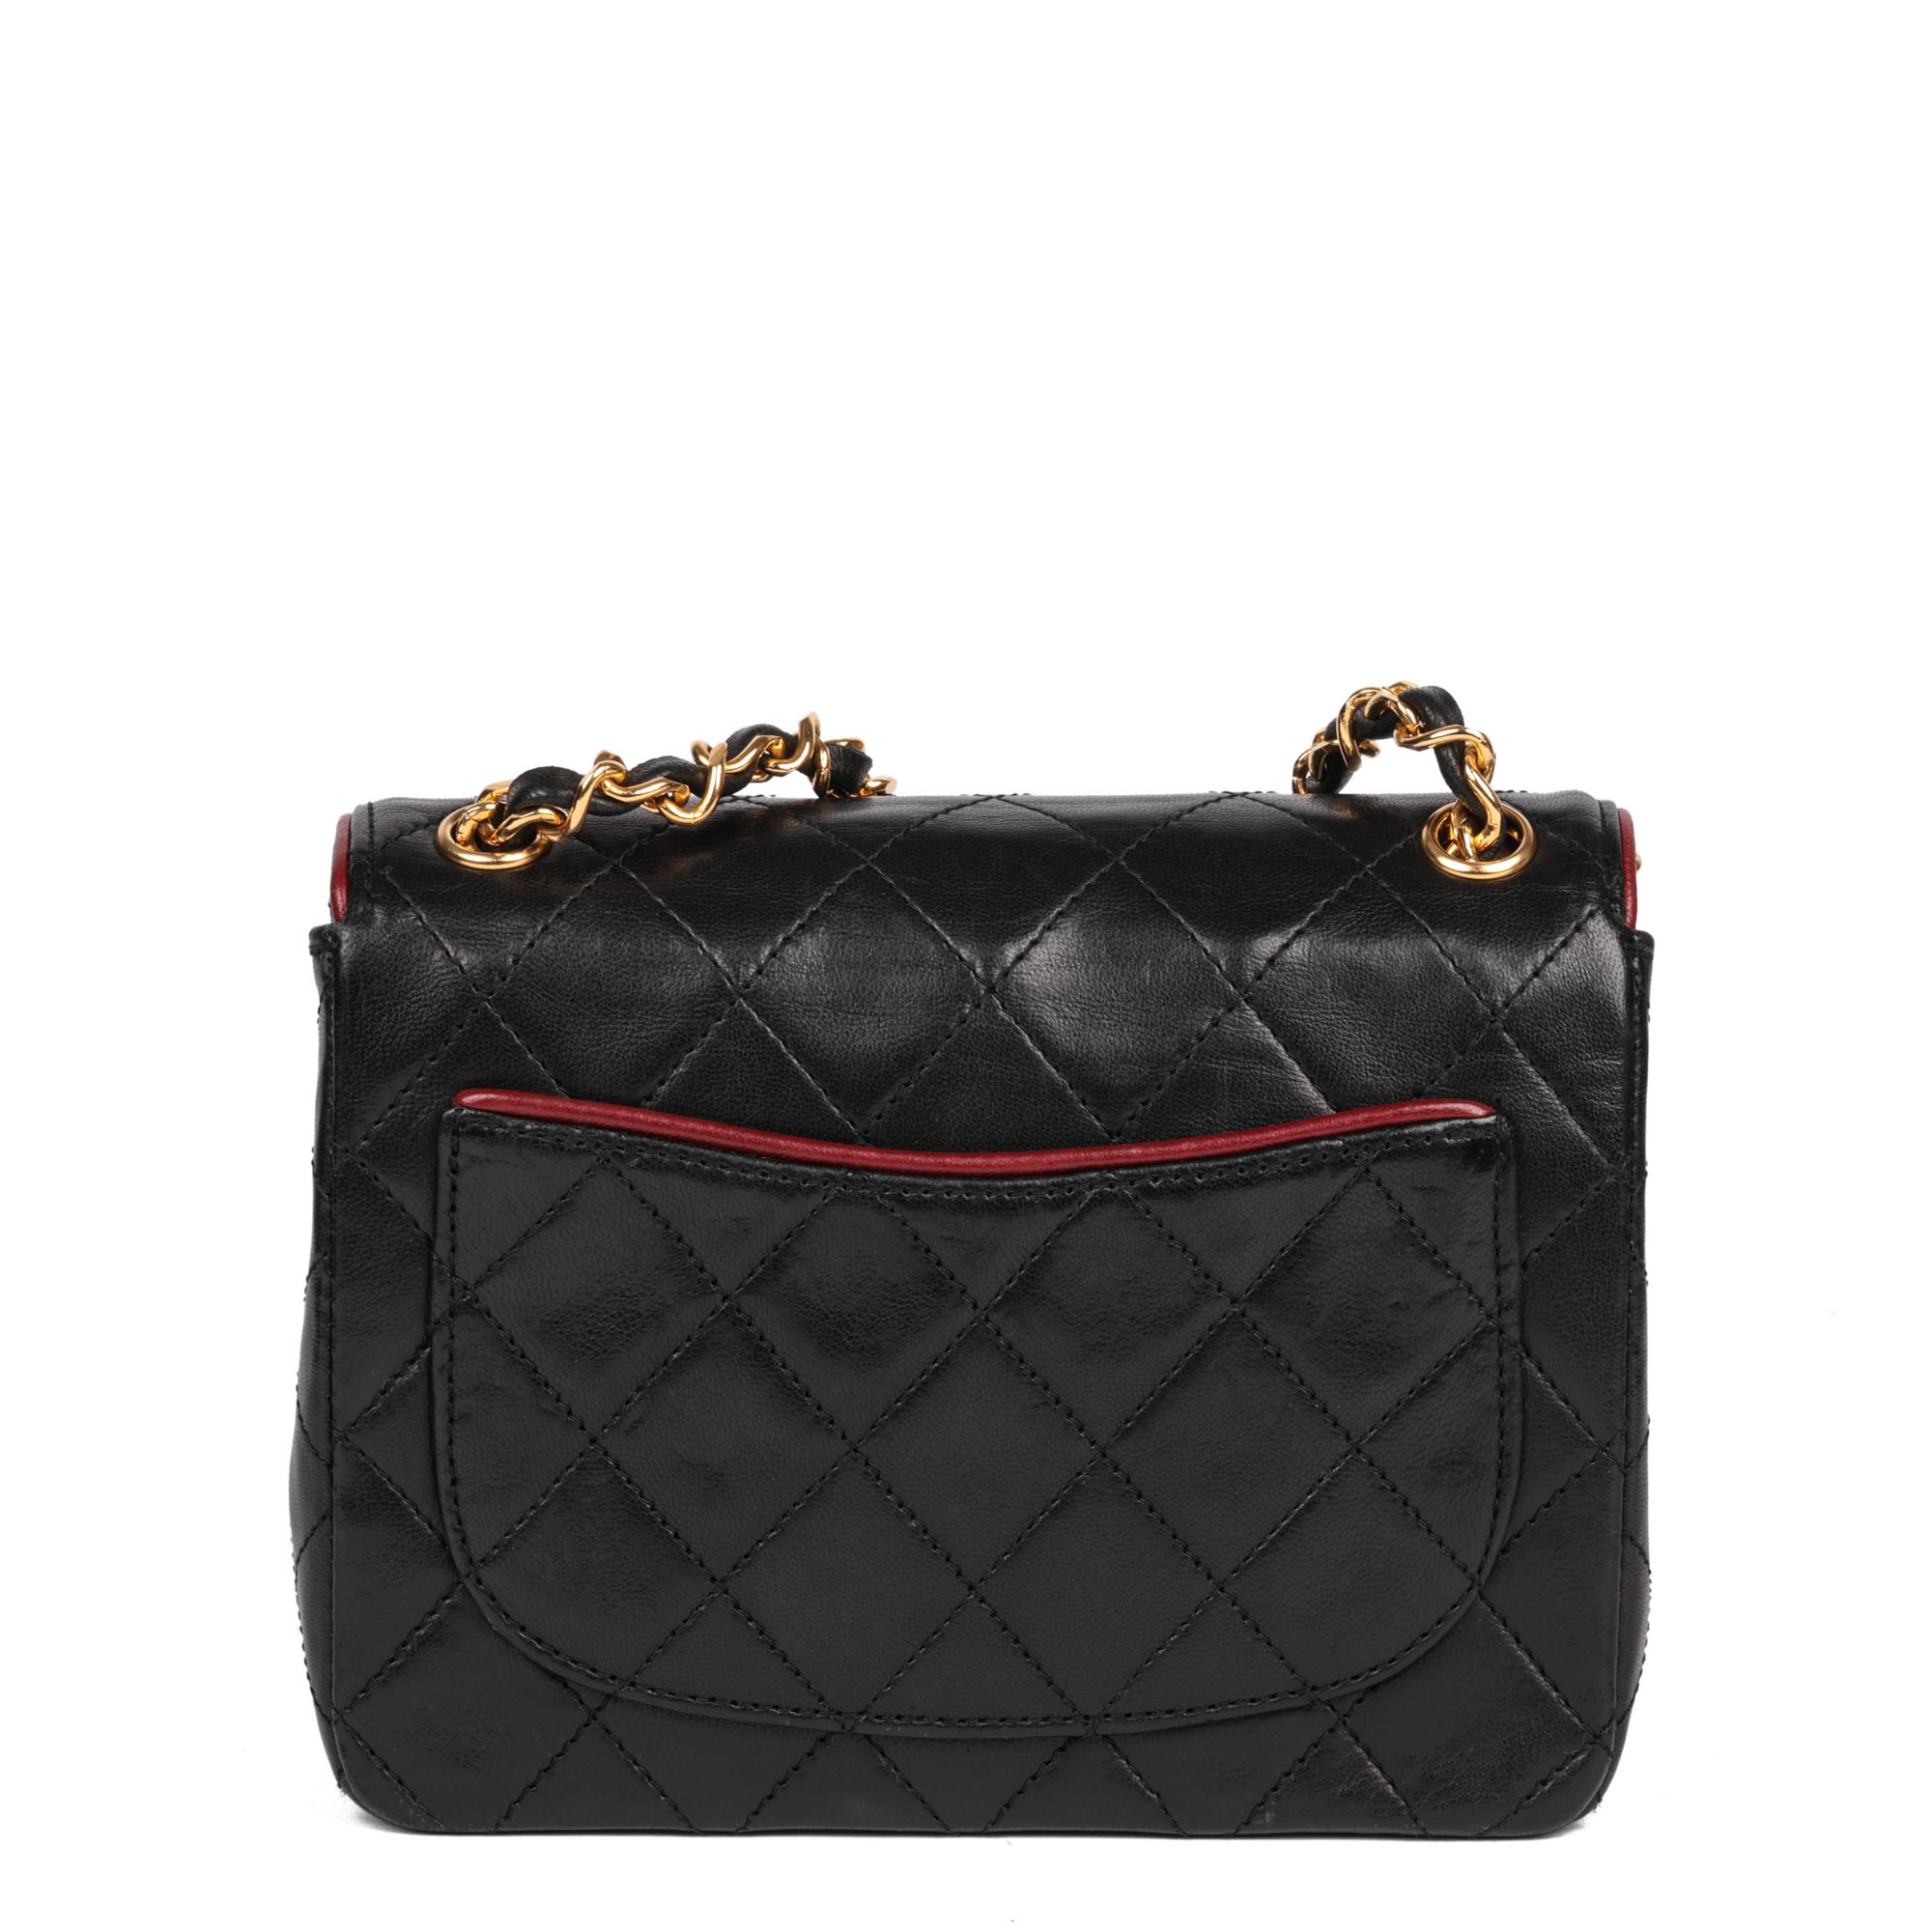 CHANEL Black Quilted Lambskin & Red Trim Vintage Square Mini Flap Bag 1